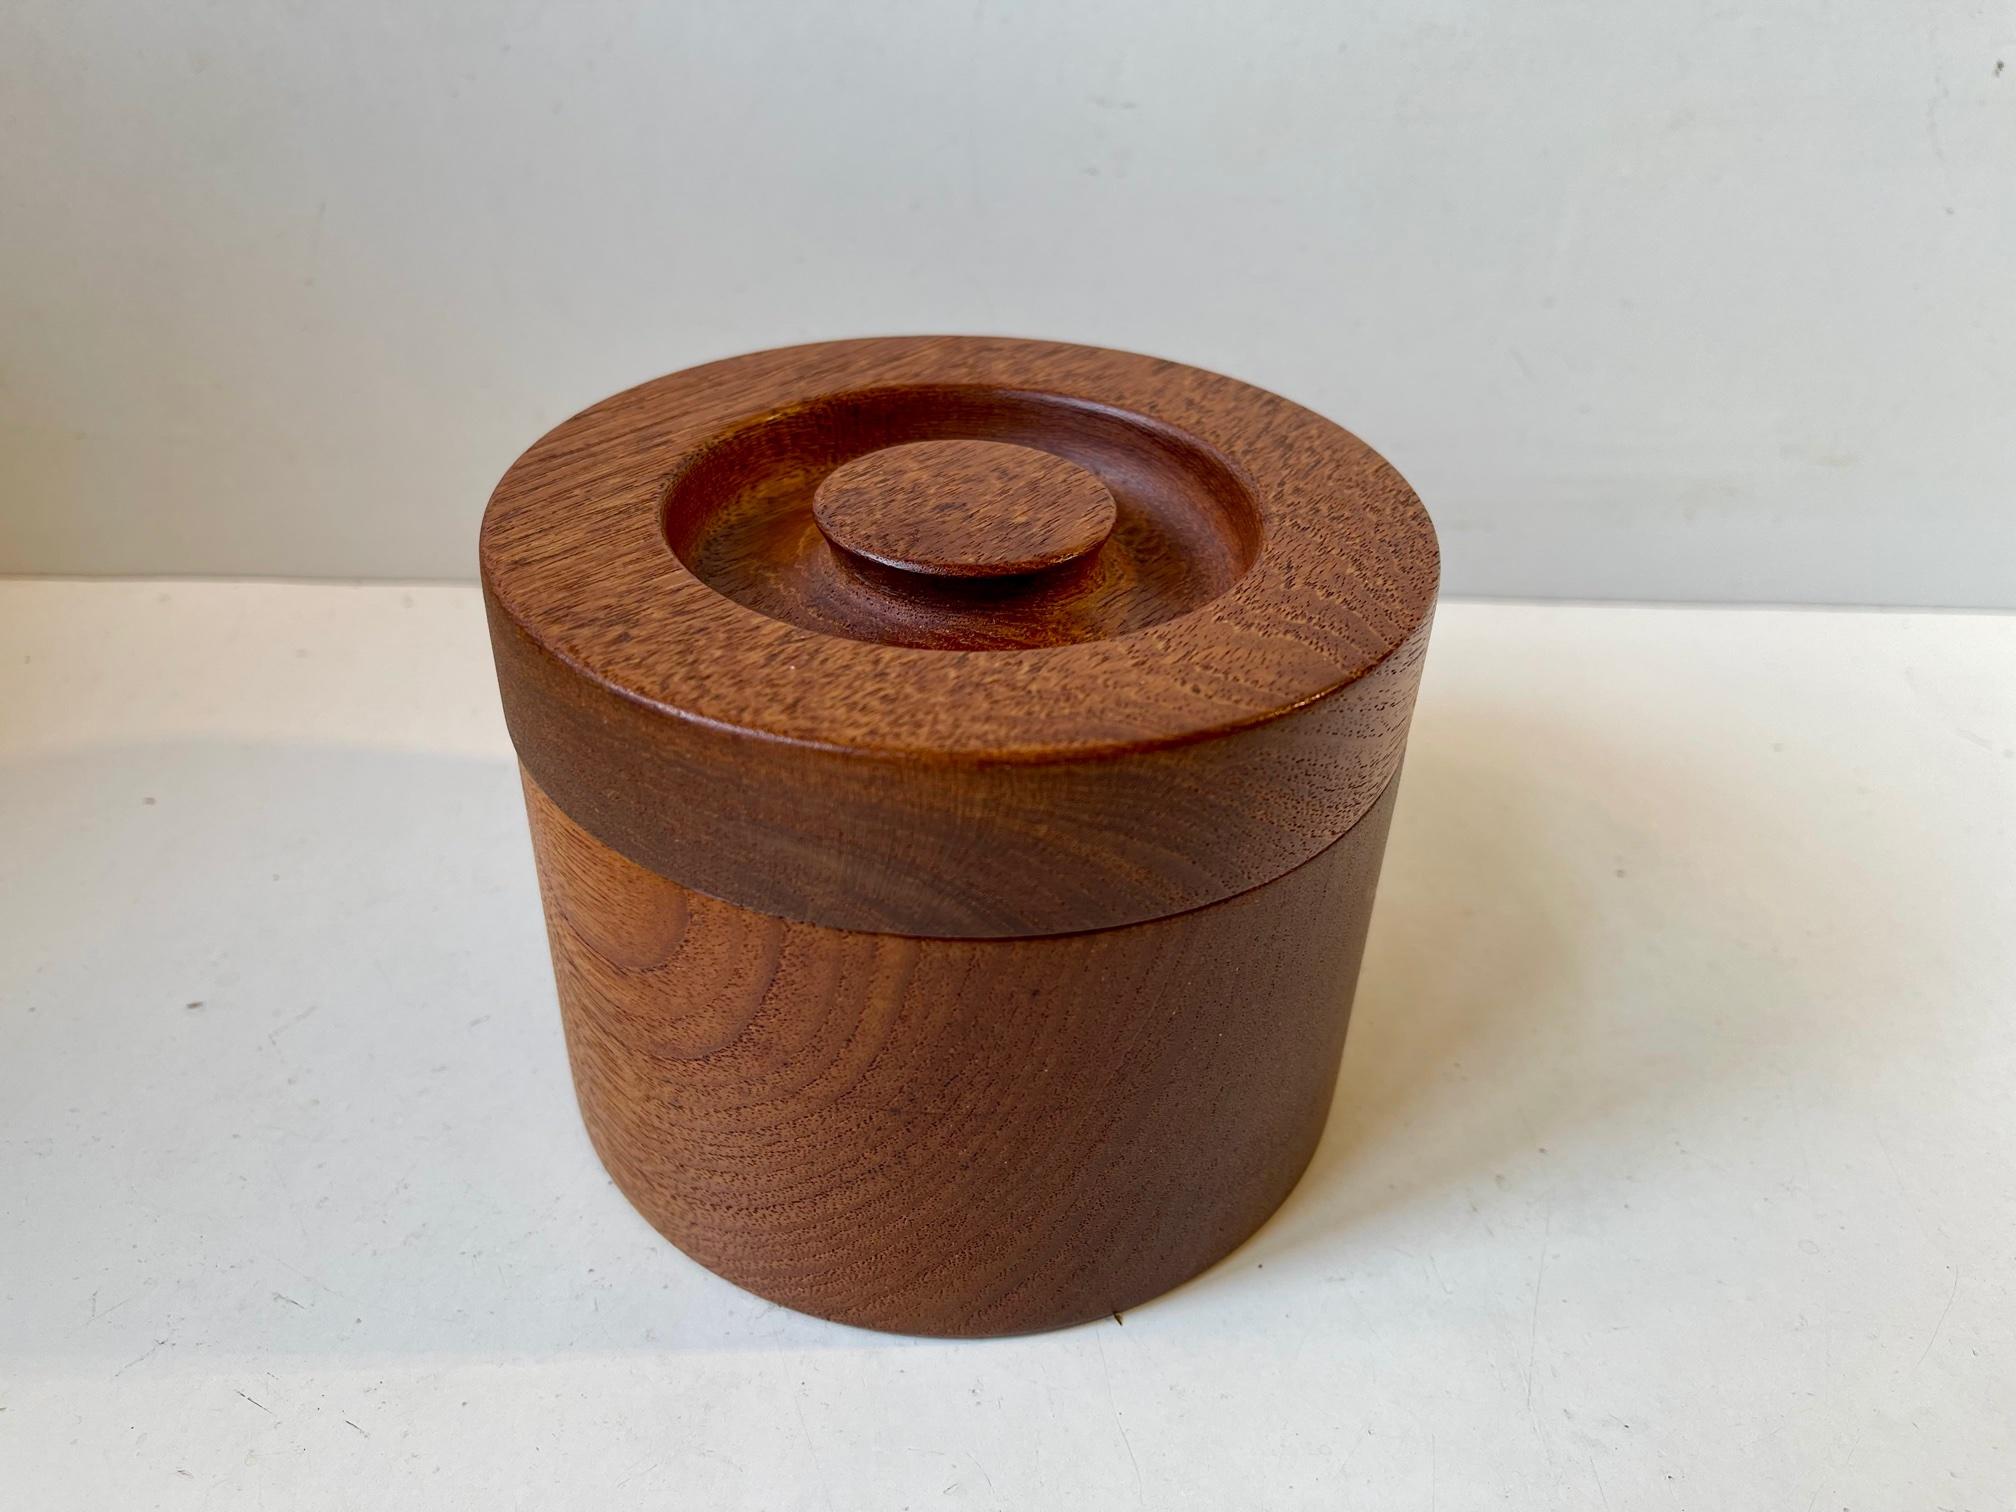 A wellmade jar for tobacco, tea, jewelry etc. Its made from solid engine turned teak and was manufactured for the Copenhagen retailer Illums Bolighus in Denmark during the 1960s in a style reminiscent of Kay Bojesen and Henning Koppel. It is signed